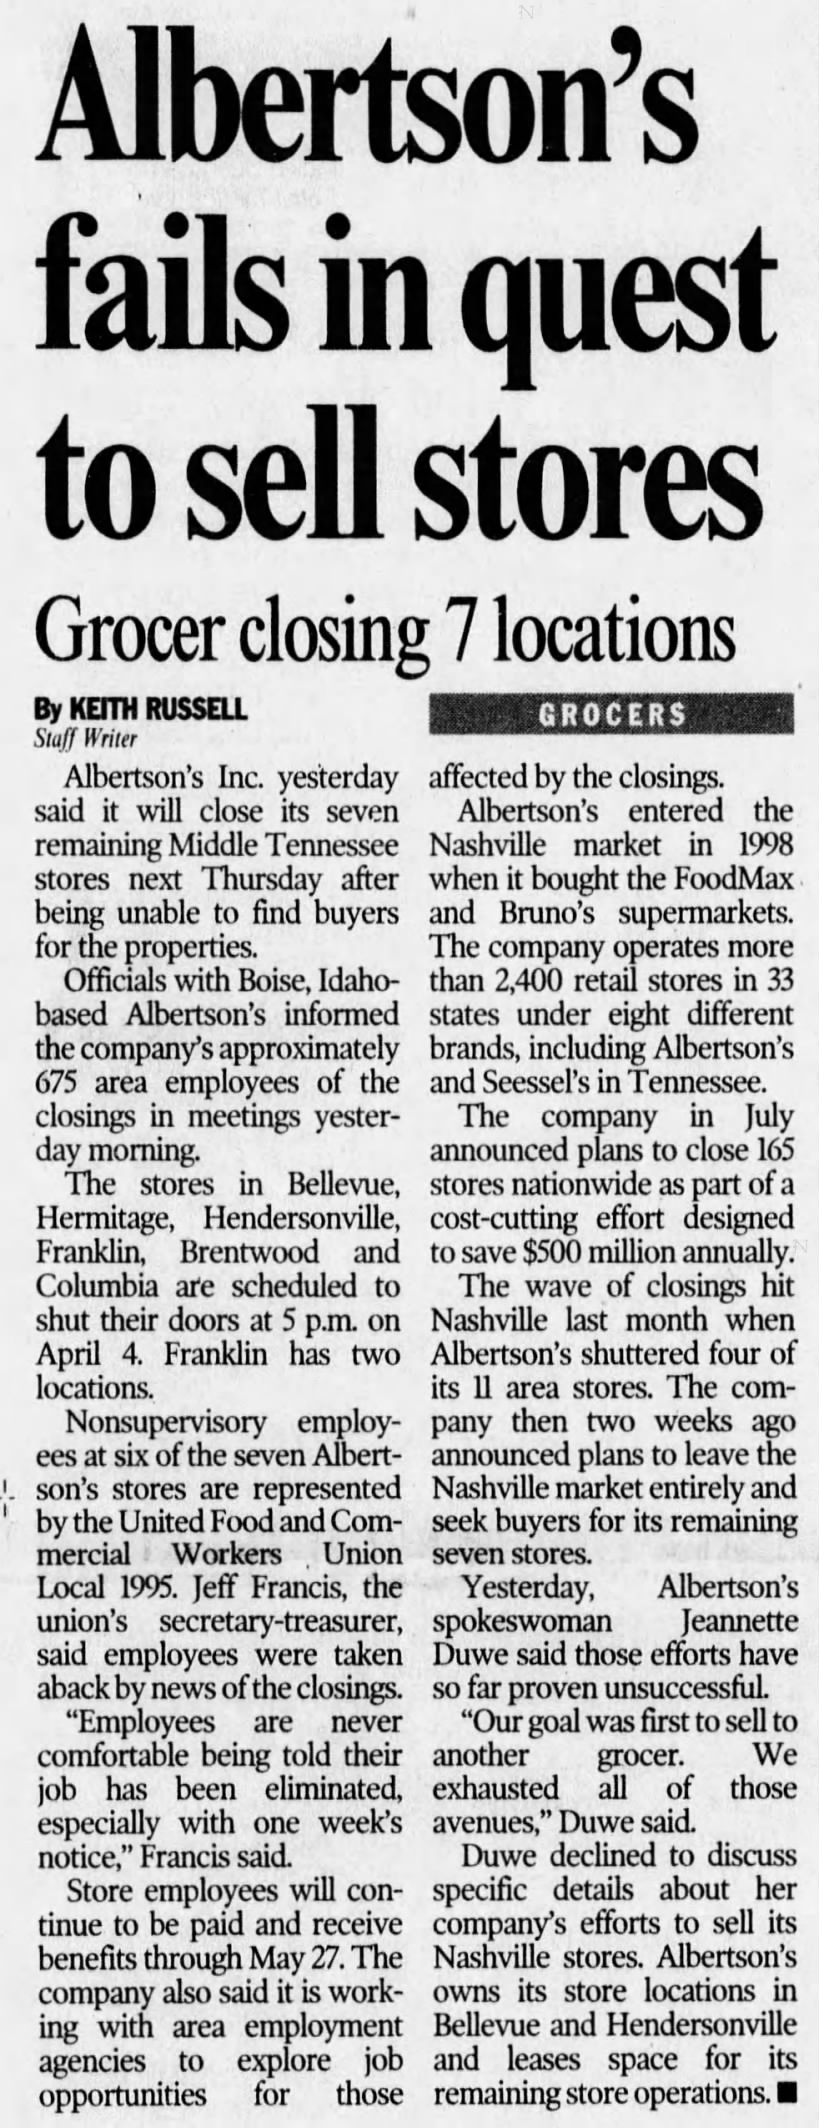 Albertson's fails in quest to sell store - remaining Nashville locations will close on April 5